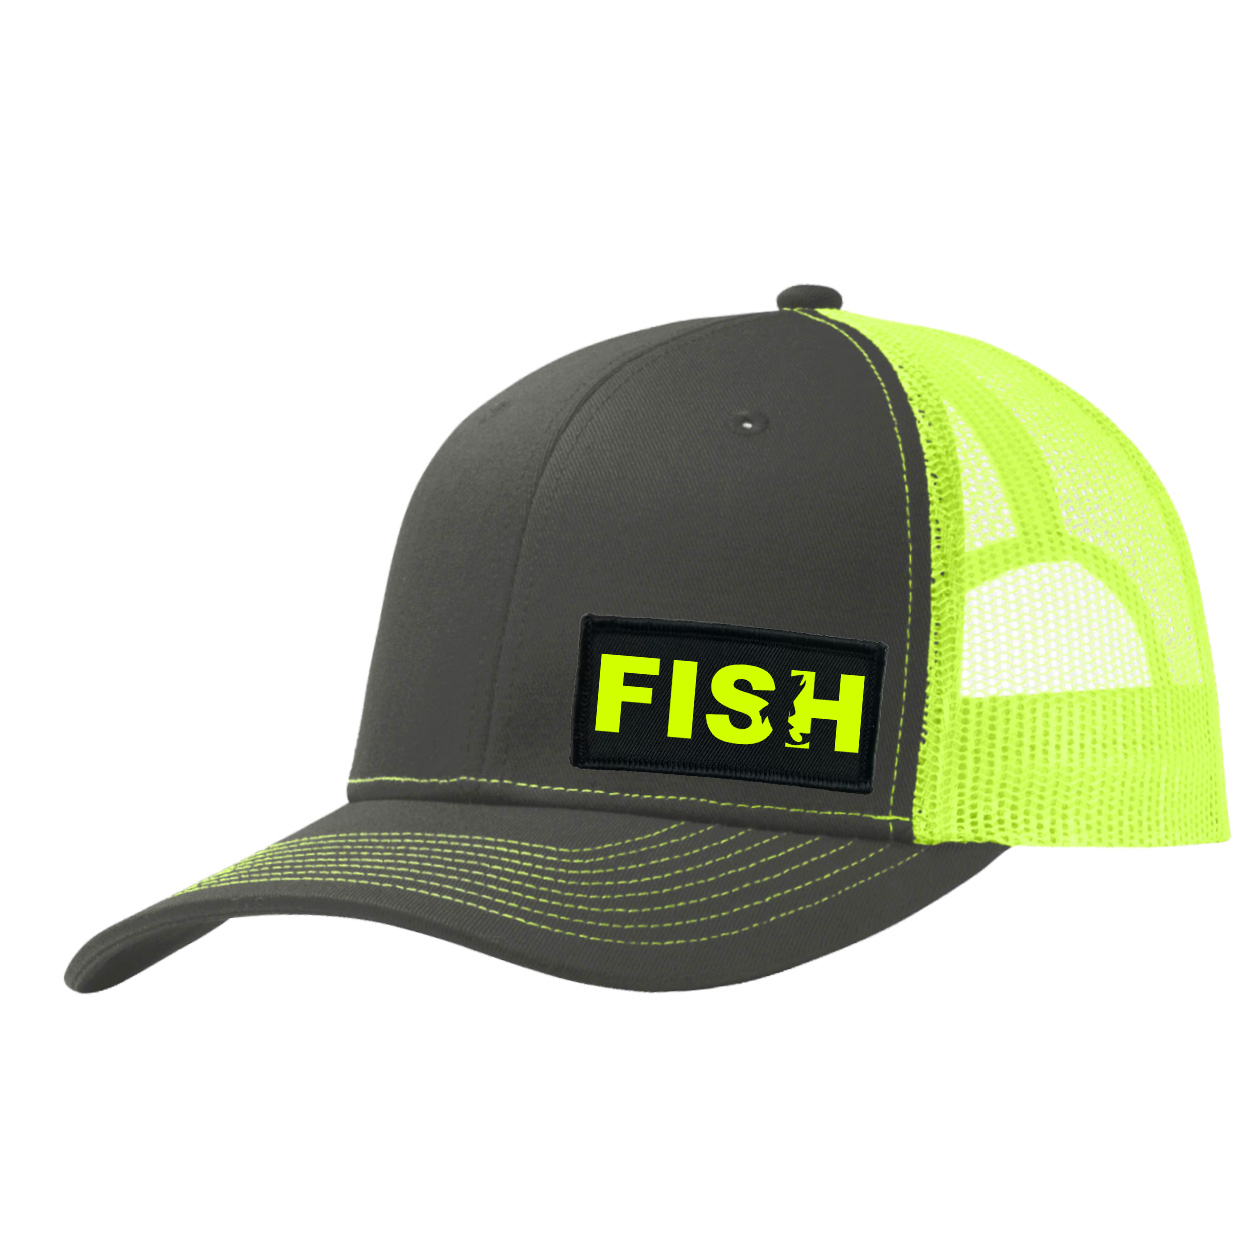 Fish Catch Logo Night Out Woven Patch Snapback Trucker Hat Charcoal/Neon Yellow (Hi-Vis Logo)